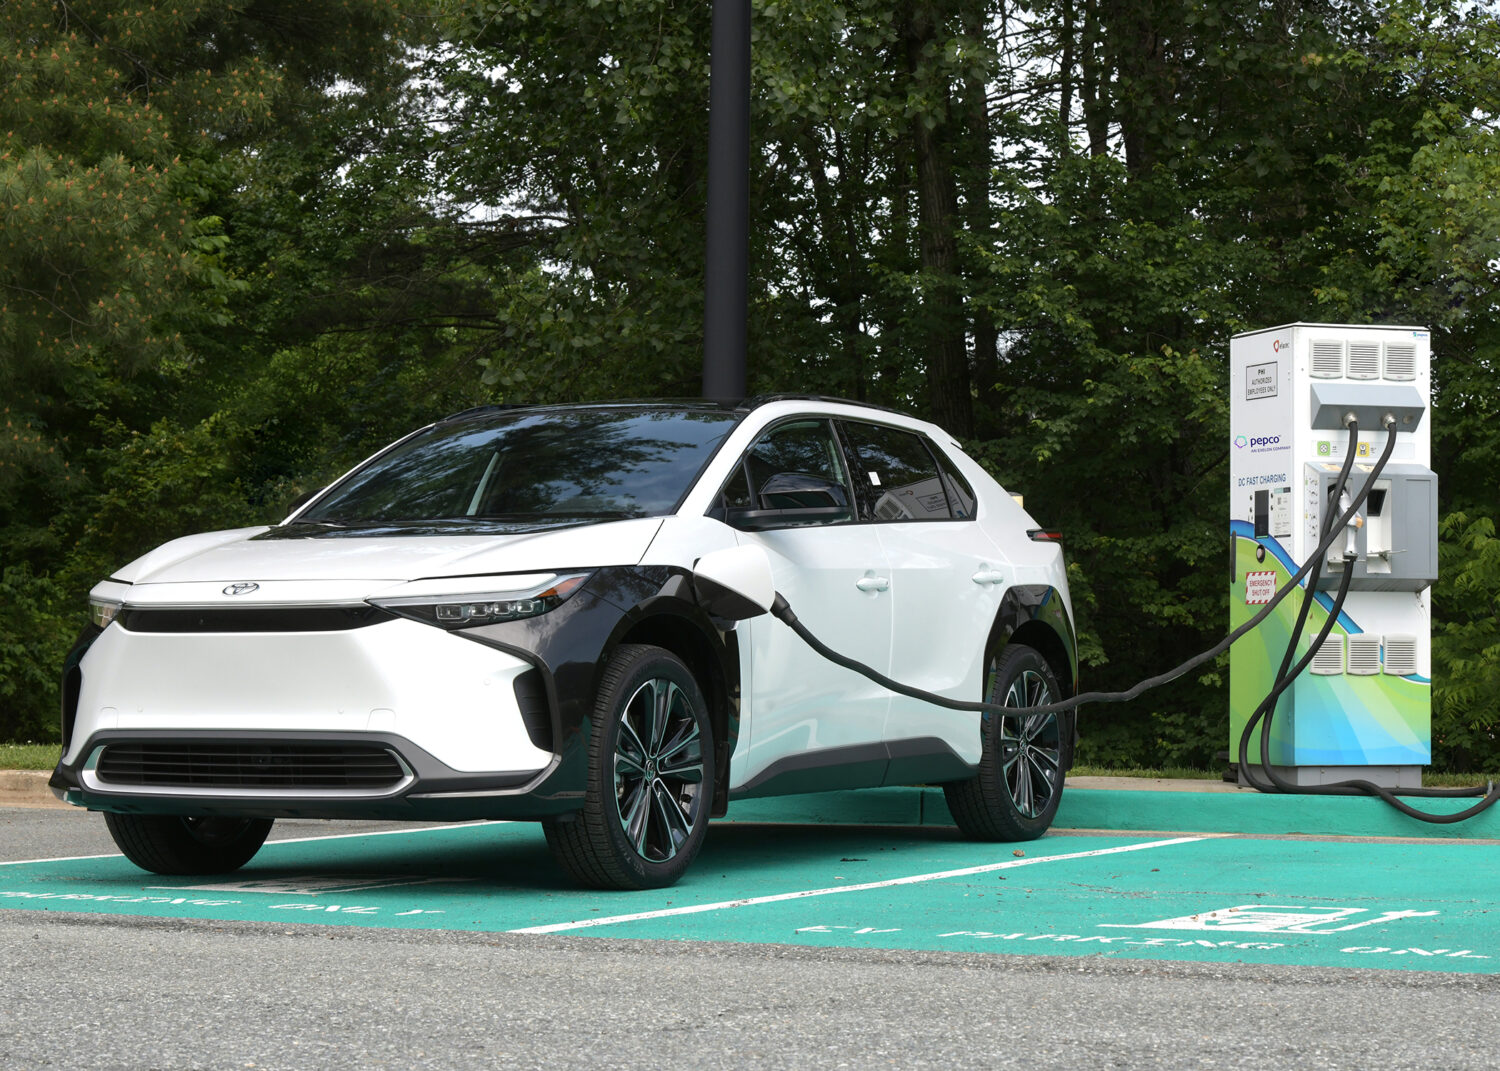 Toyota and Pepco collaborate in Maryland to advance vehicle-to-grid (V2G) technology using Toyota’s bZ4X BEV, aiming to enhance energy reliability, integrate renewables, and reduce electricity costs.